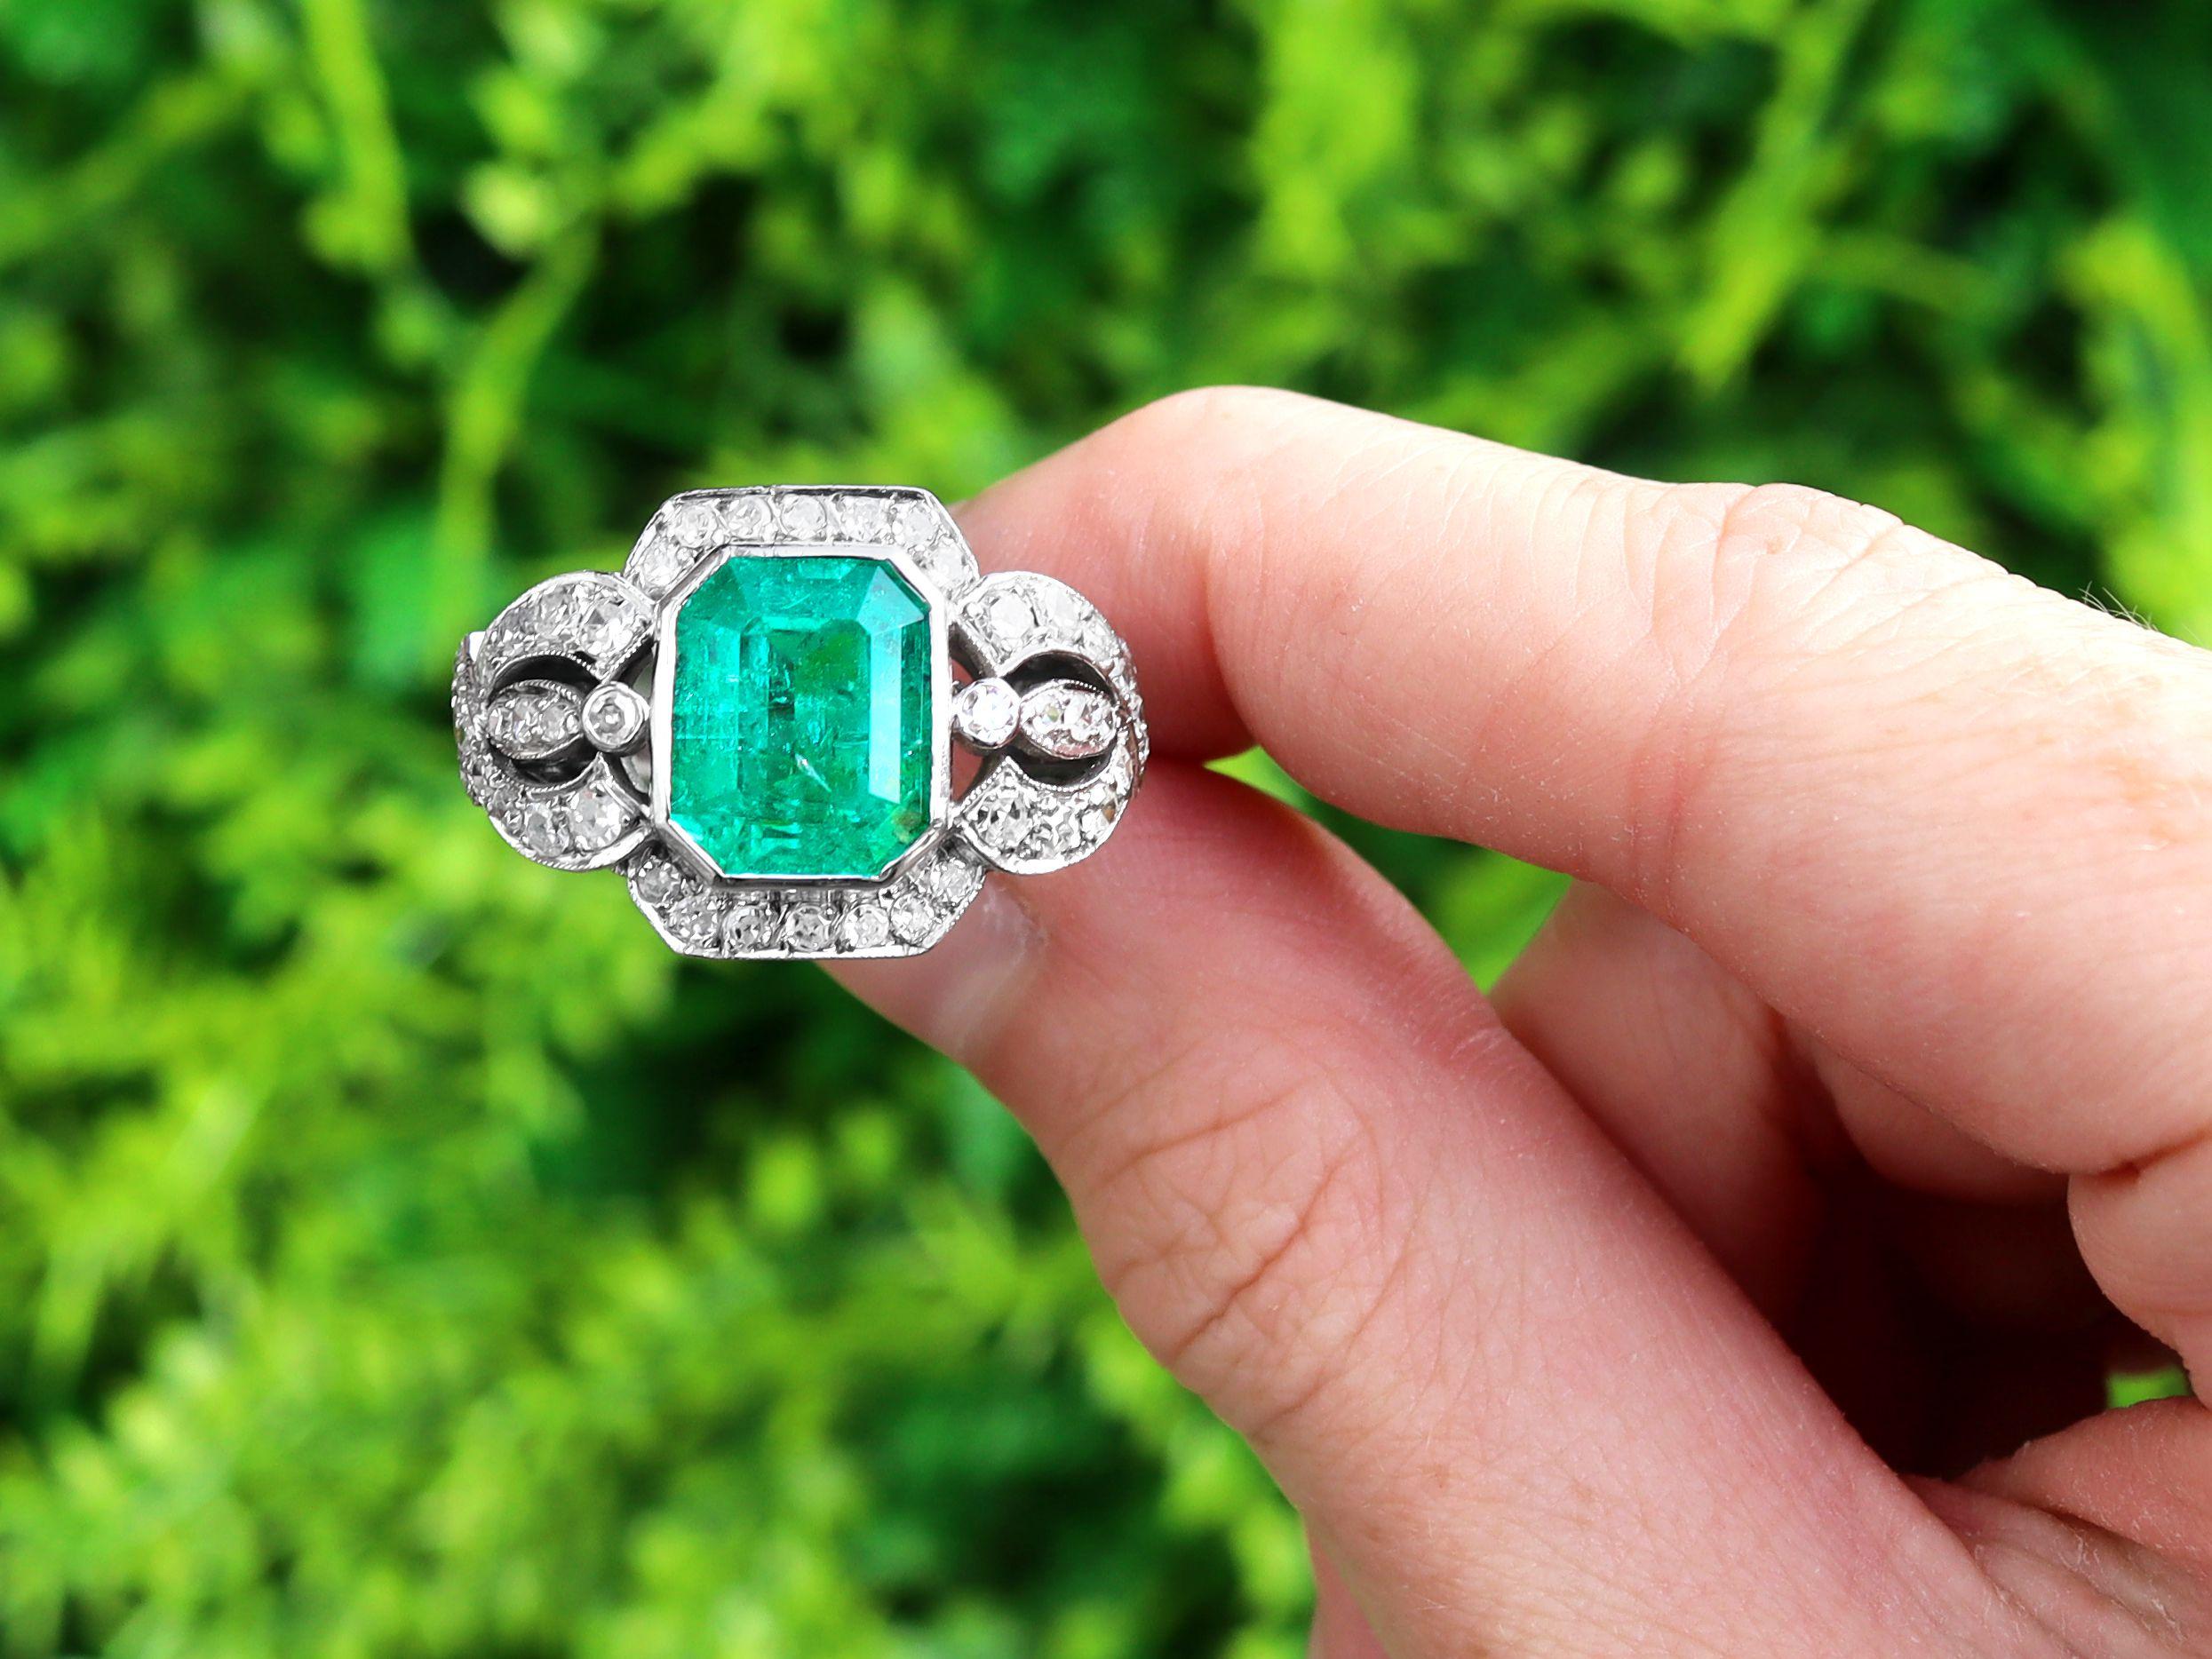 A stunning, fine and impressive vintage 4.85 carat emerald and 1.80 carat diamond, 9 carat gold and silver set dress ring; part of our jewellery and estate jewelry collections

This stunning, fine and impressive vintage emerald and diamond ring has